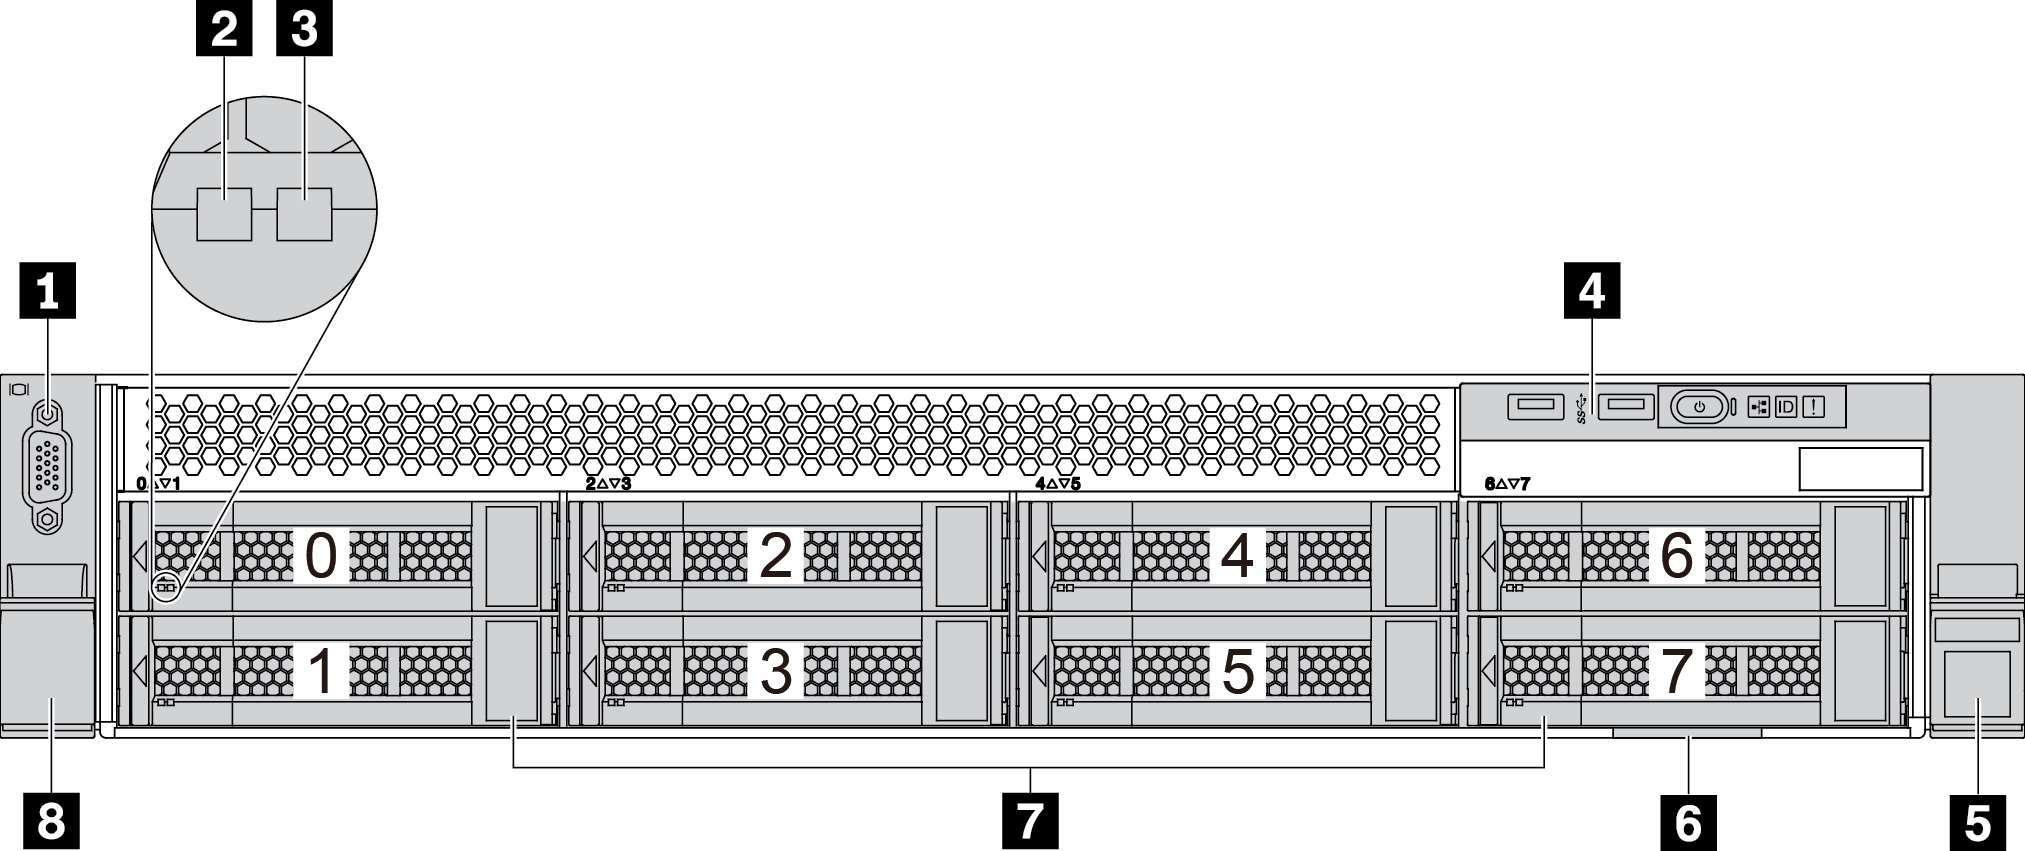 Front view of server models with eight 3.5-inch drive bays